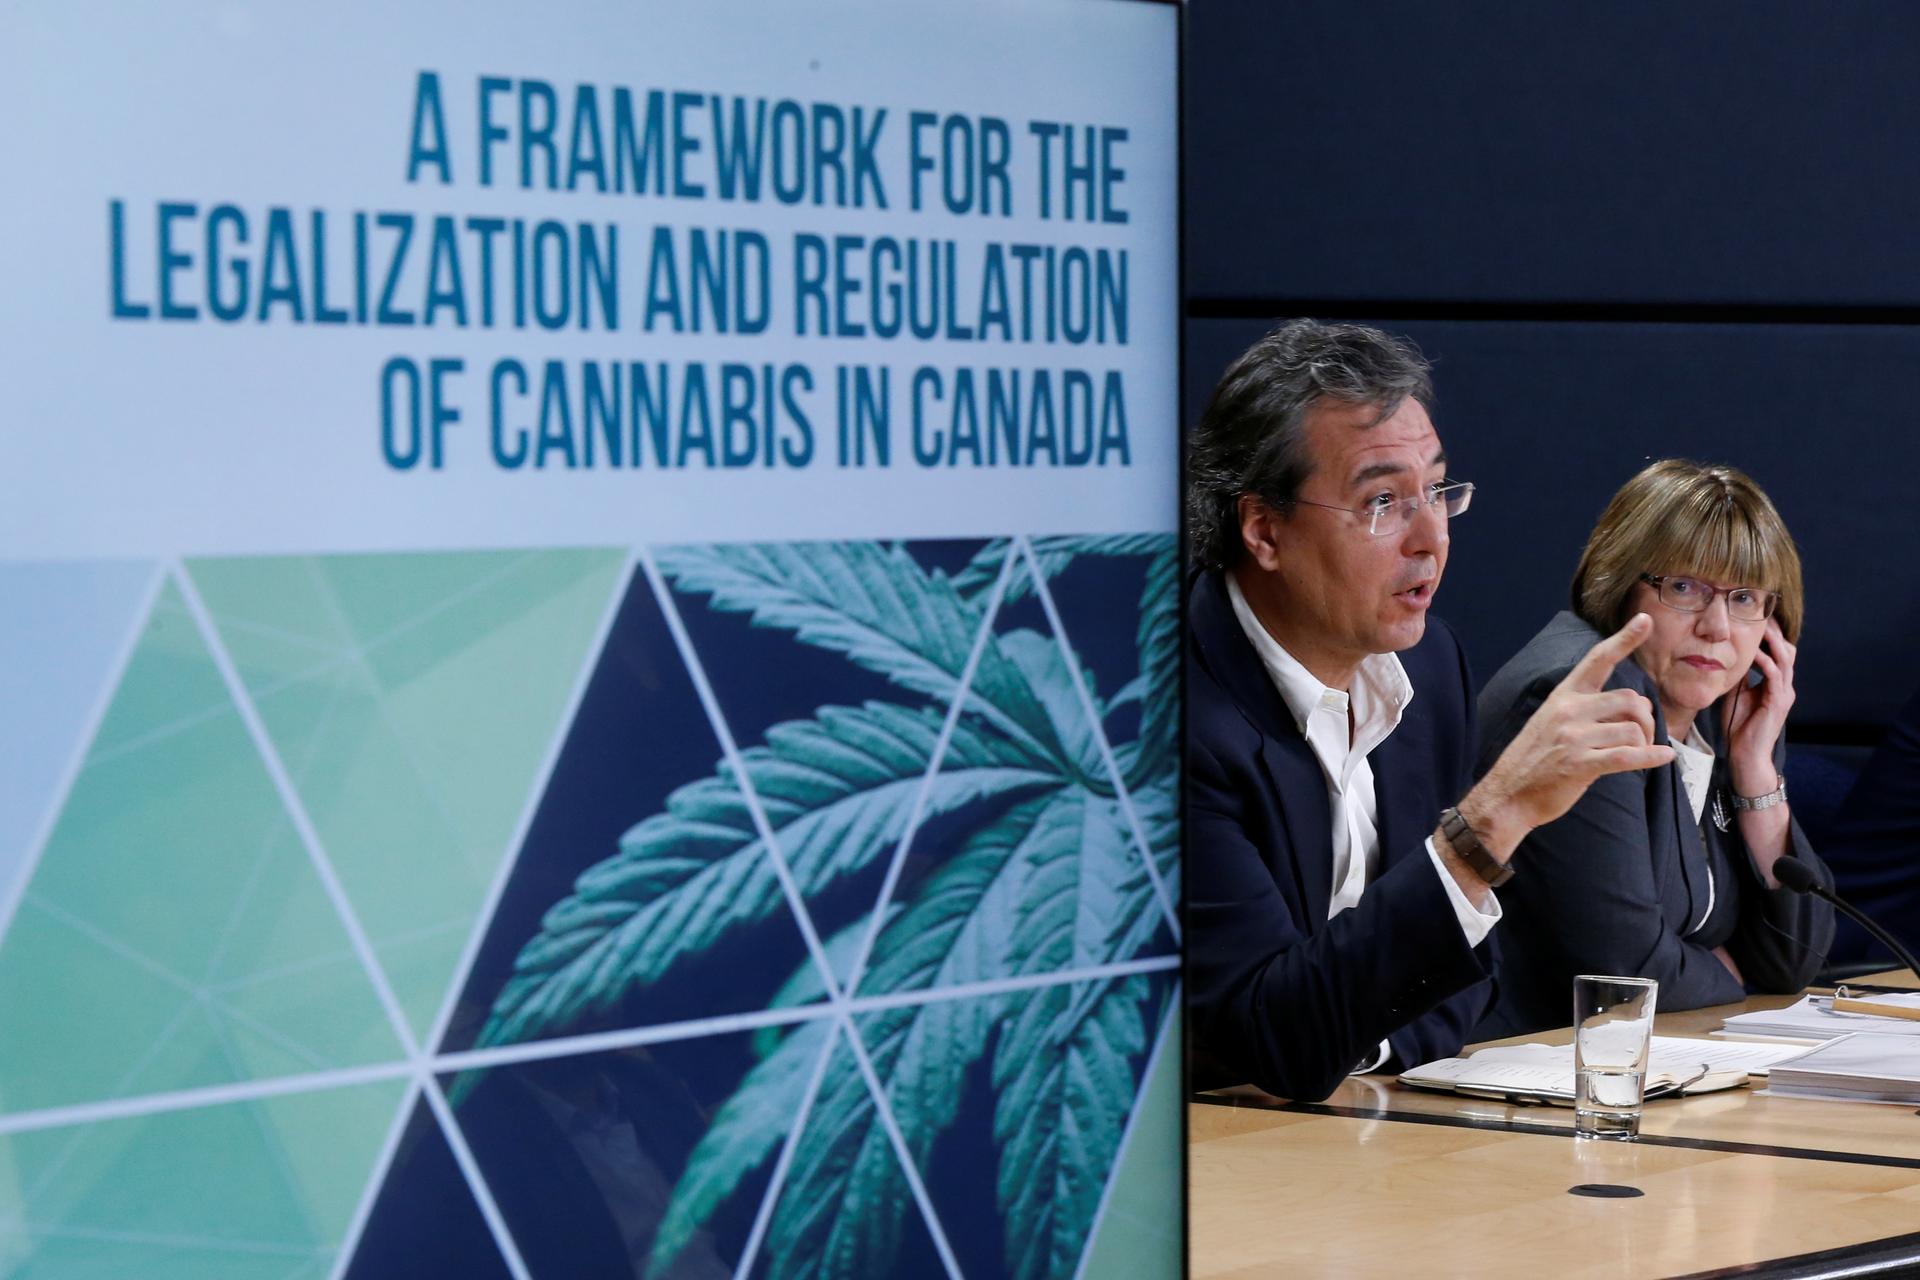 Anne McLellan, Chair of the Task Force on Cannabis Legalization and Regulation, and Vice Chair Mark Ware take part in a news conference in Ottawa, Ontario, Canada December 13, 2016.